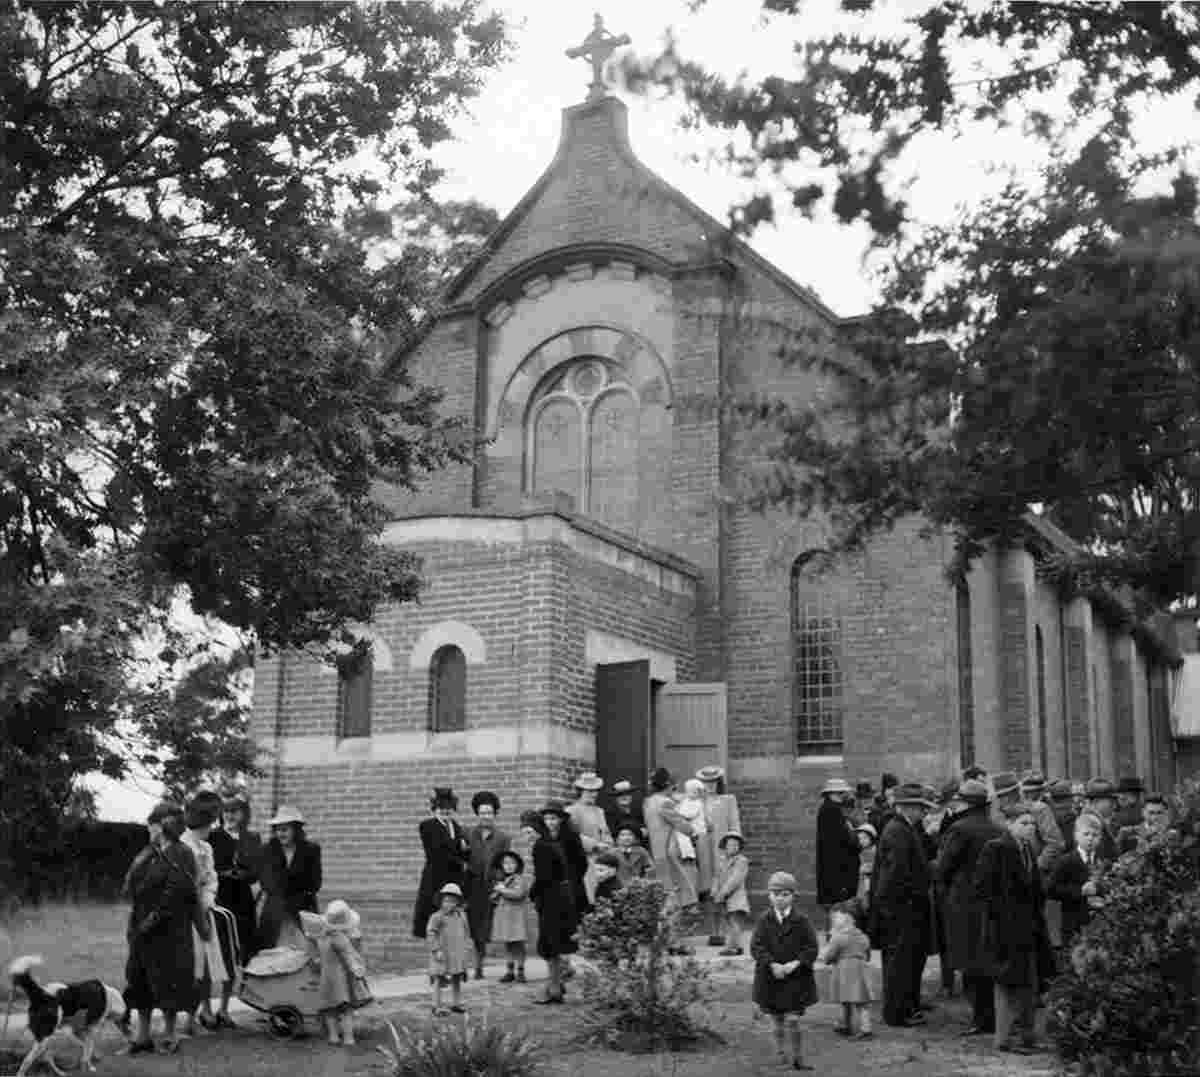 Drouin. After Sunday morning mass at St Ita's, probably 1944